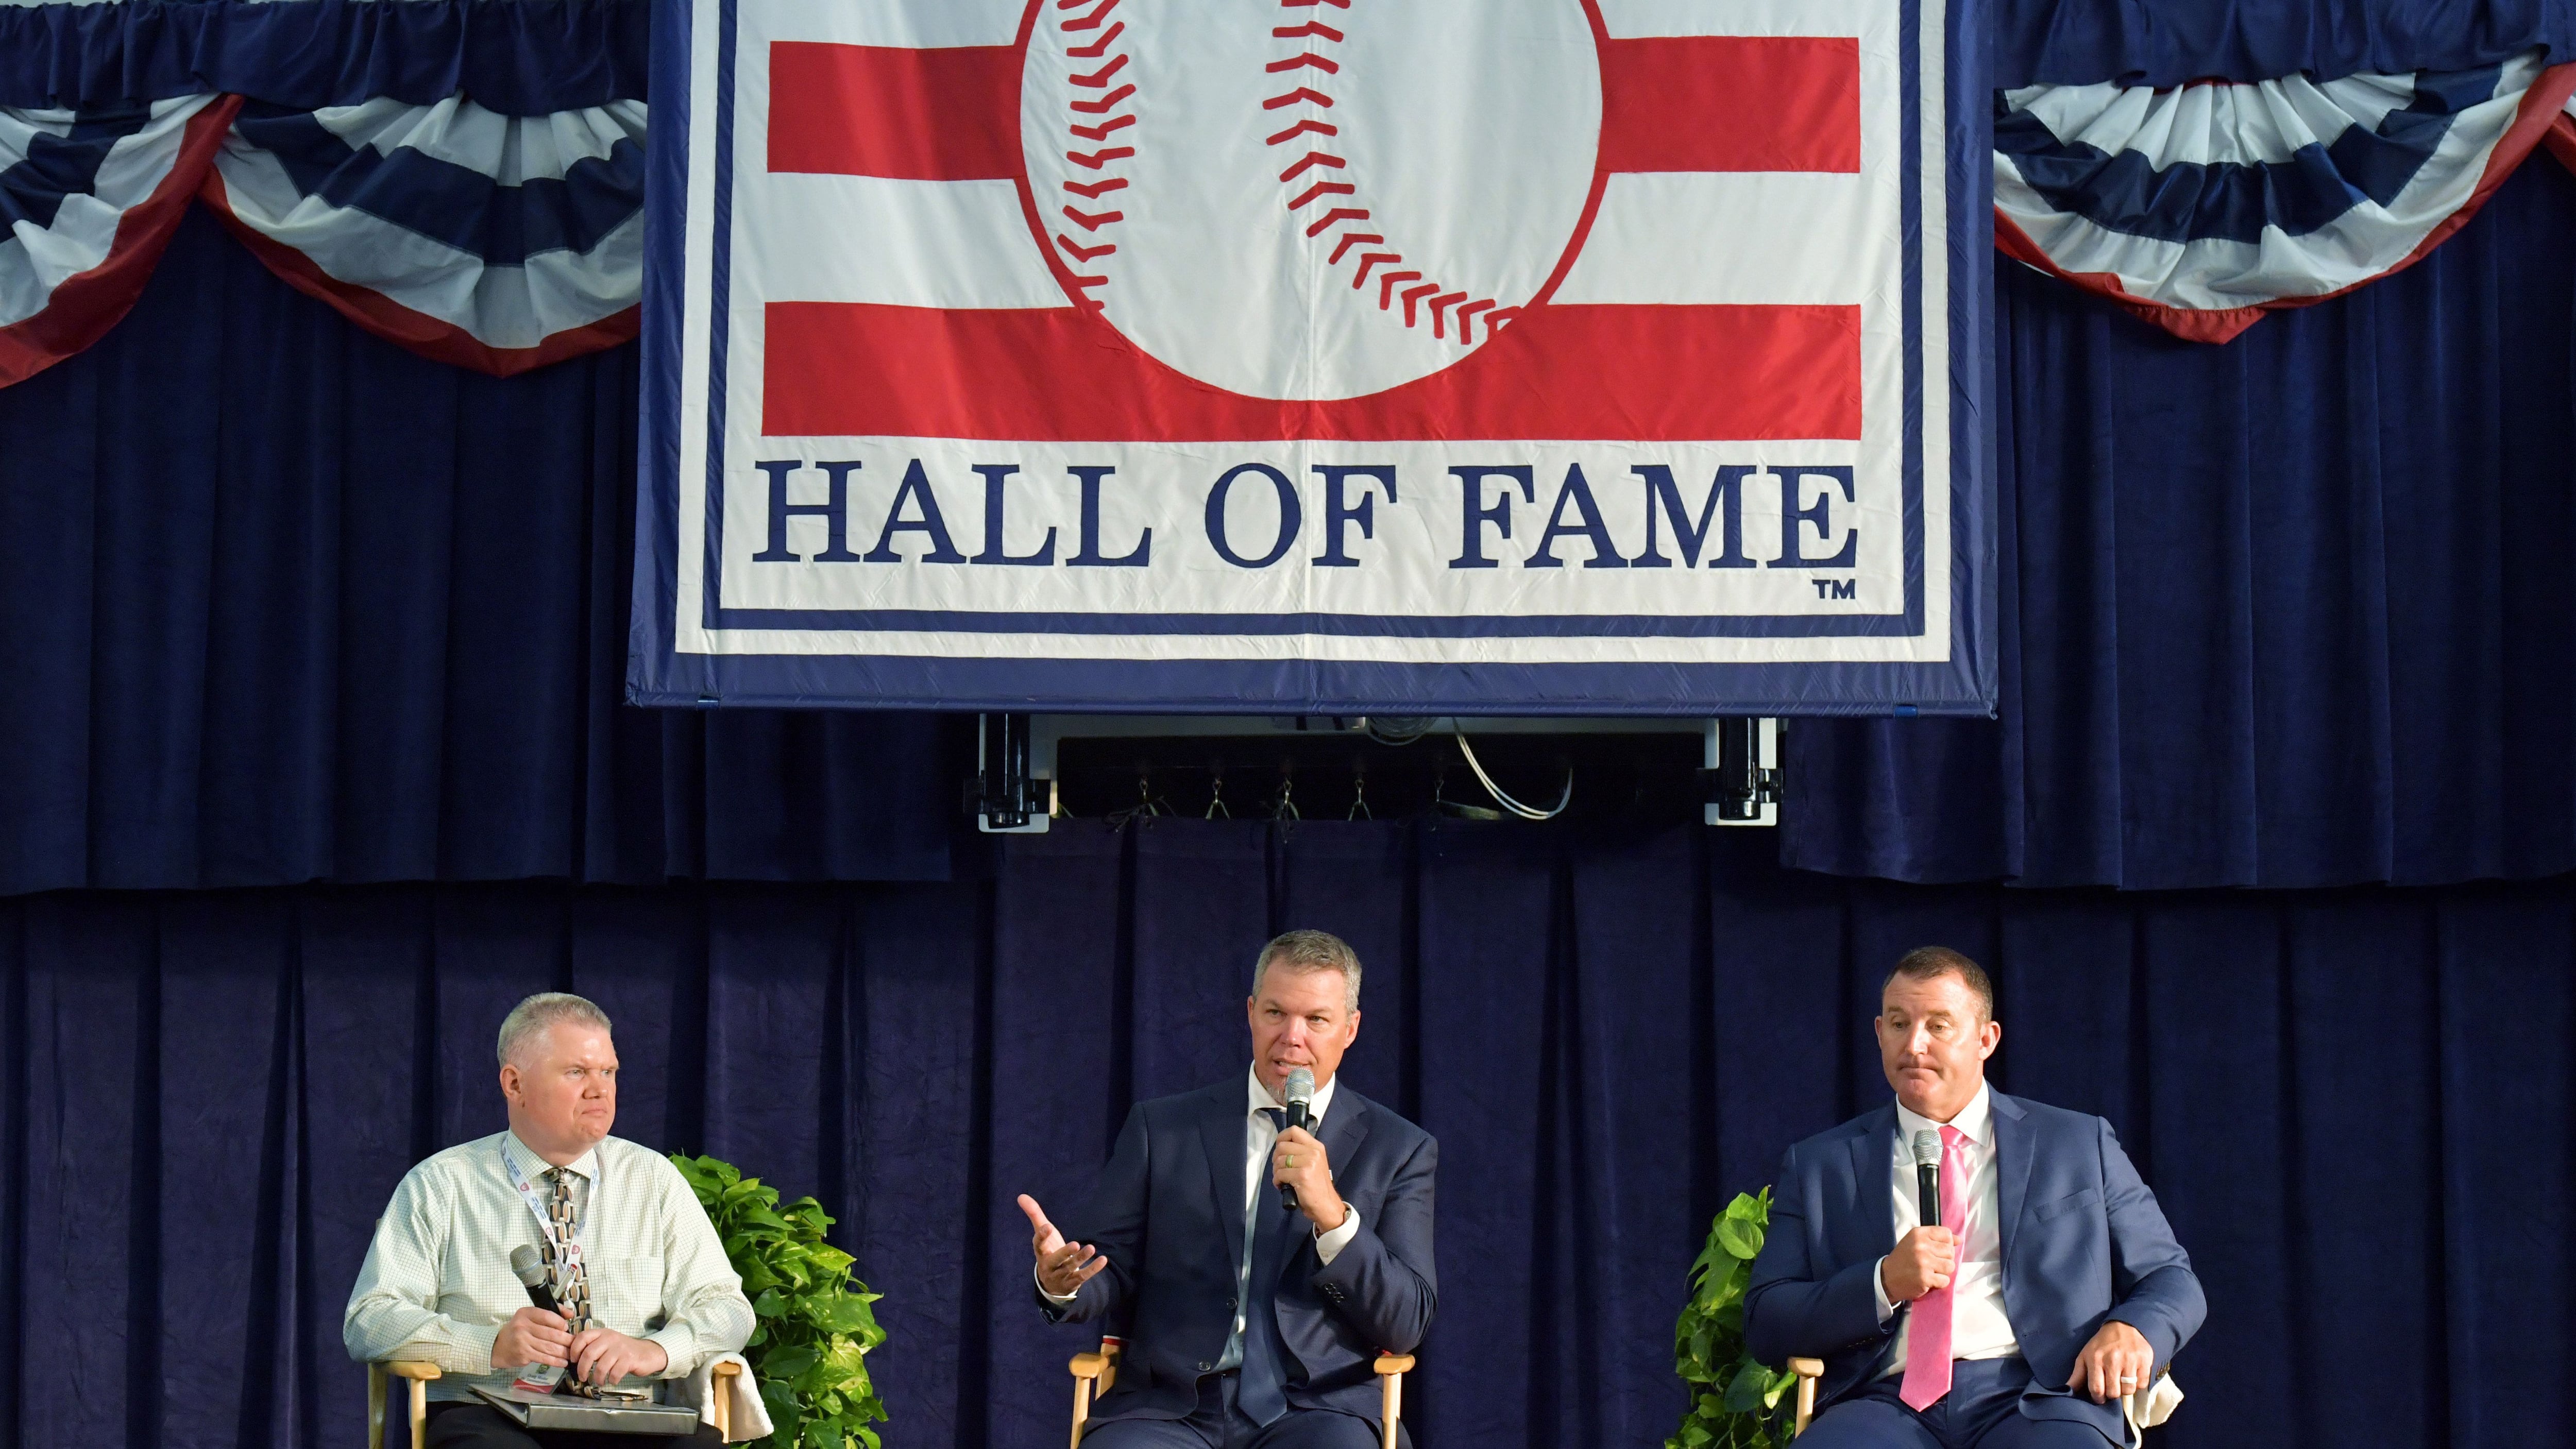 Chipper Jones Joins Braves' Hall of Fame Dynasty - Cooperstown Cred